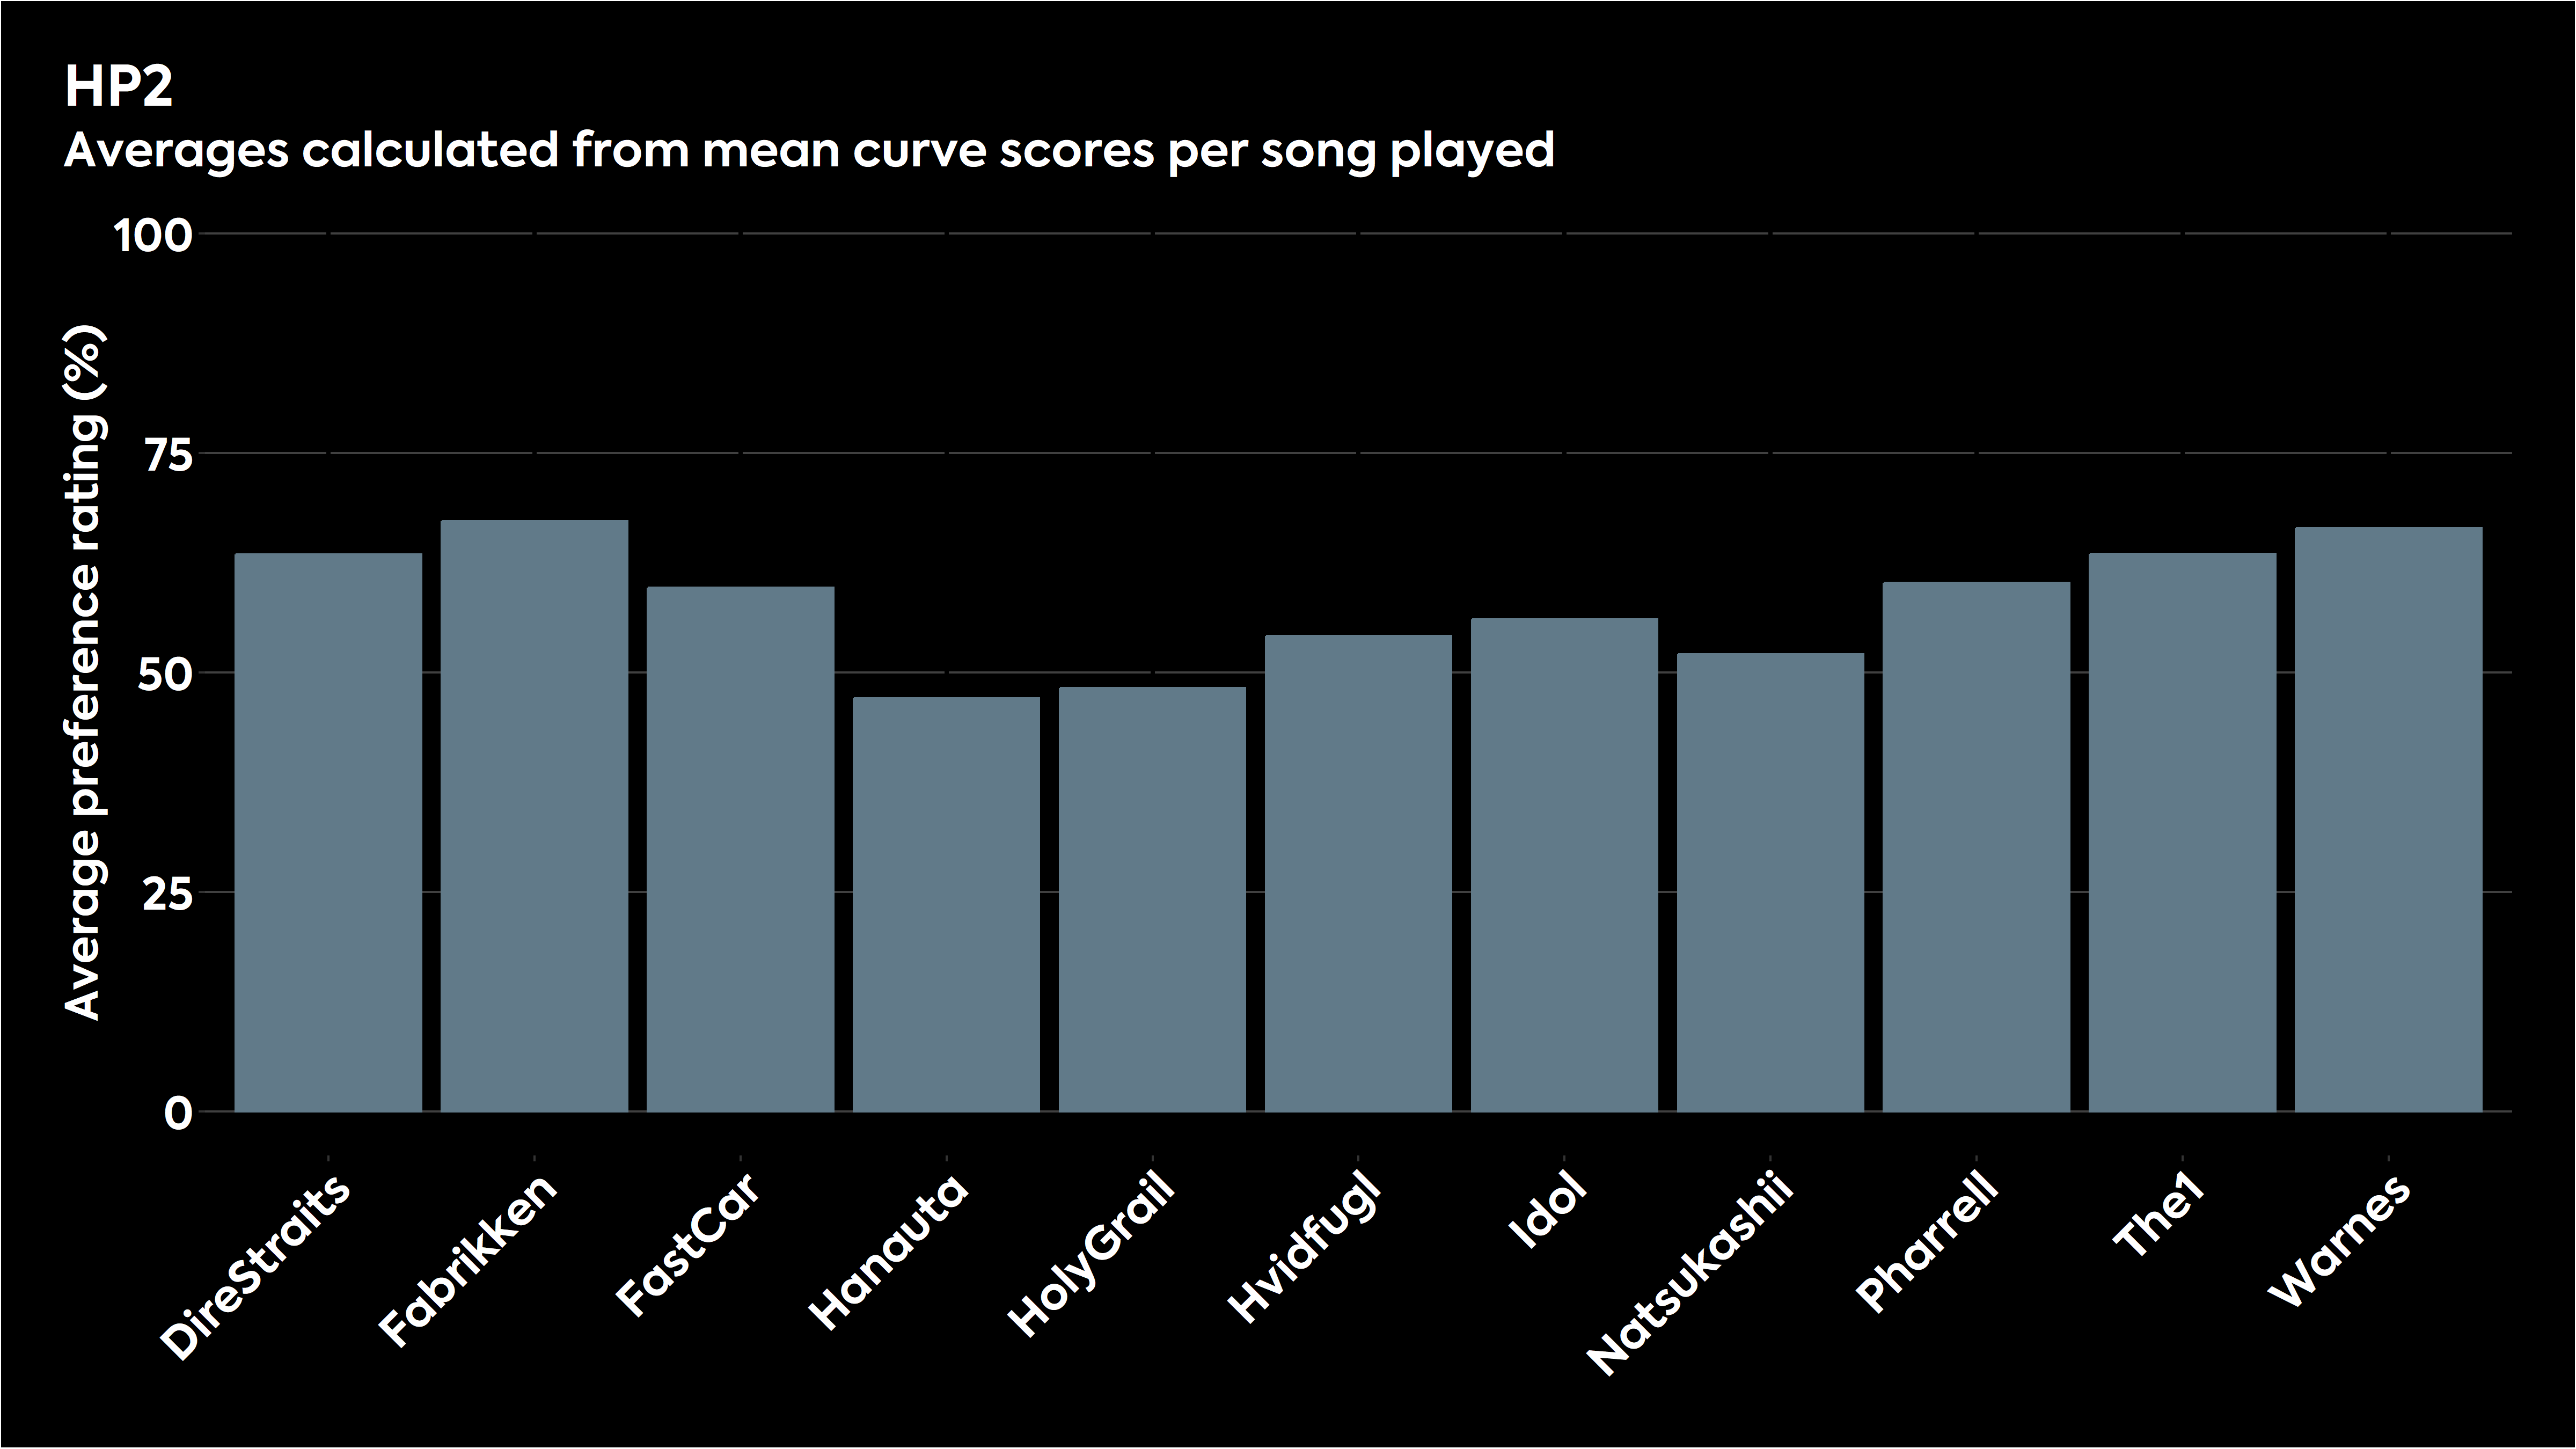 Bar chart showing how the various stimuli were judged for HP2 in listening tests.